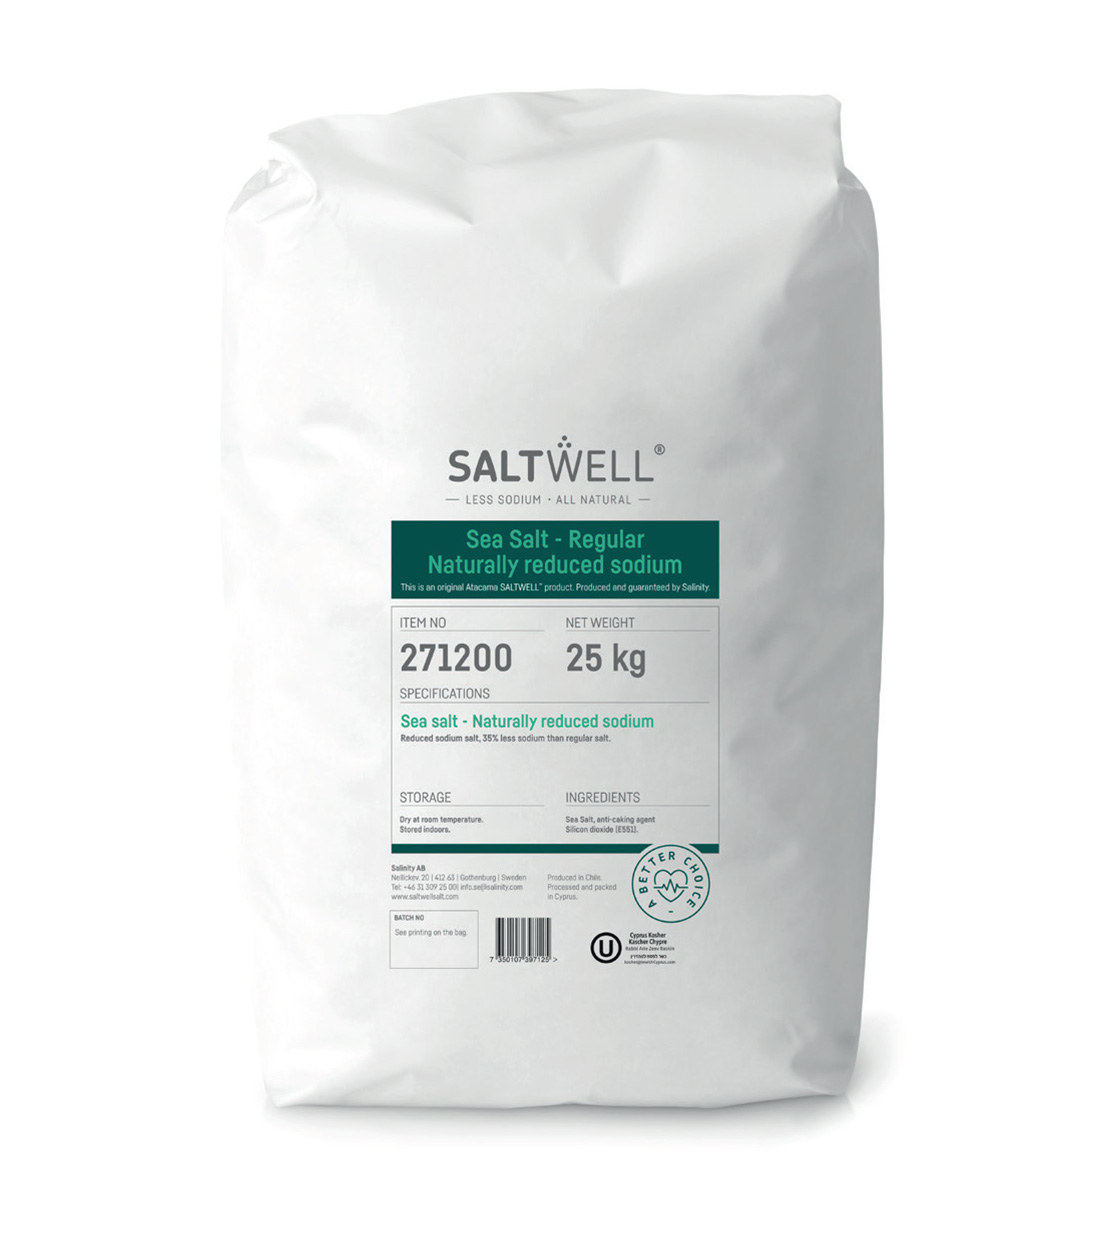 SALTWELL® Regular. Sea salt with 35% less sodium, natural grain size incl  anticaking silicon dioxide., Saltwell AB